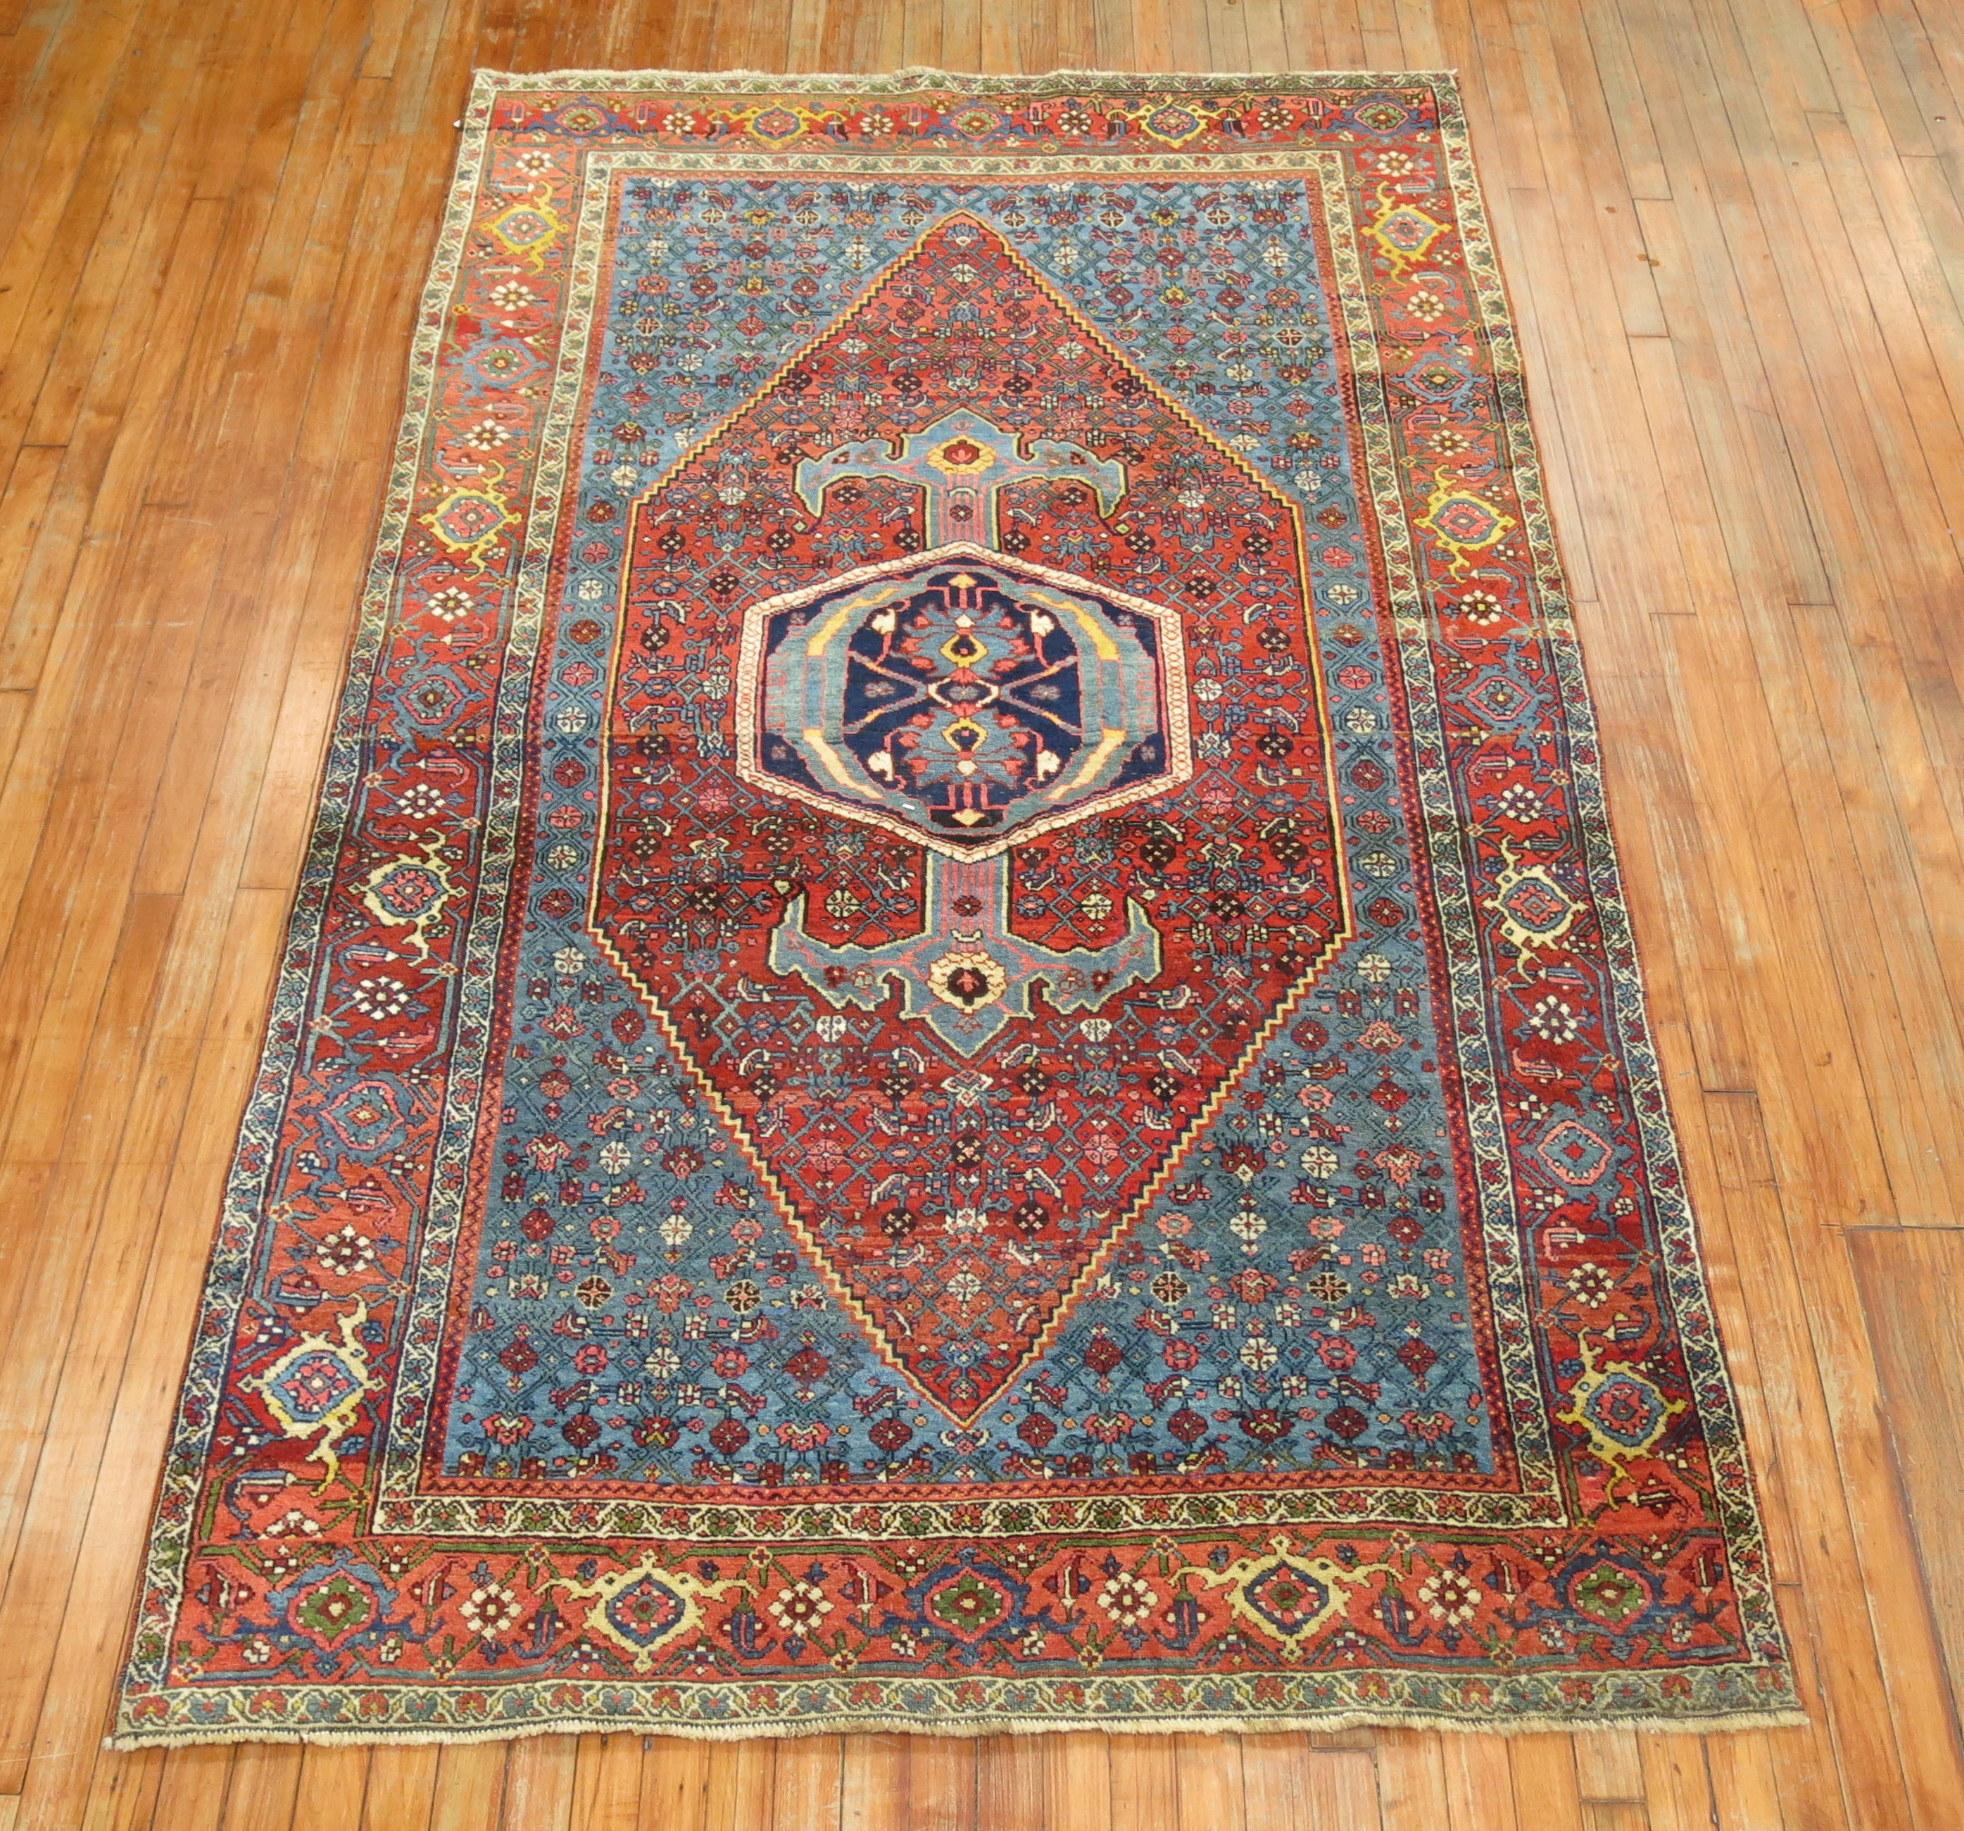 Traditional accent size Persian Bidjar rug from the 1900s

Measures: 4'9” x 8'4”

Bidjar rugs, produced in Northwest Iran are among the finest of Persian rugs by virtue of their design and technique. They cannot be identified readily by their